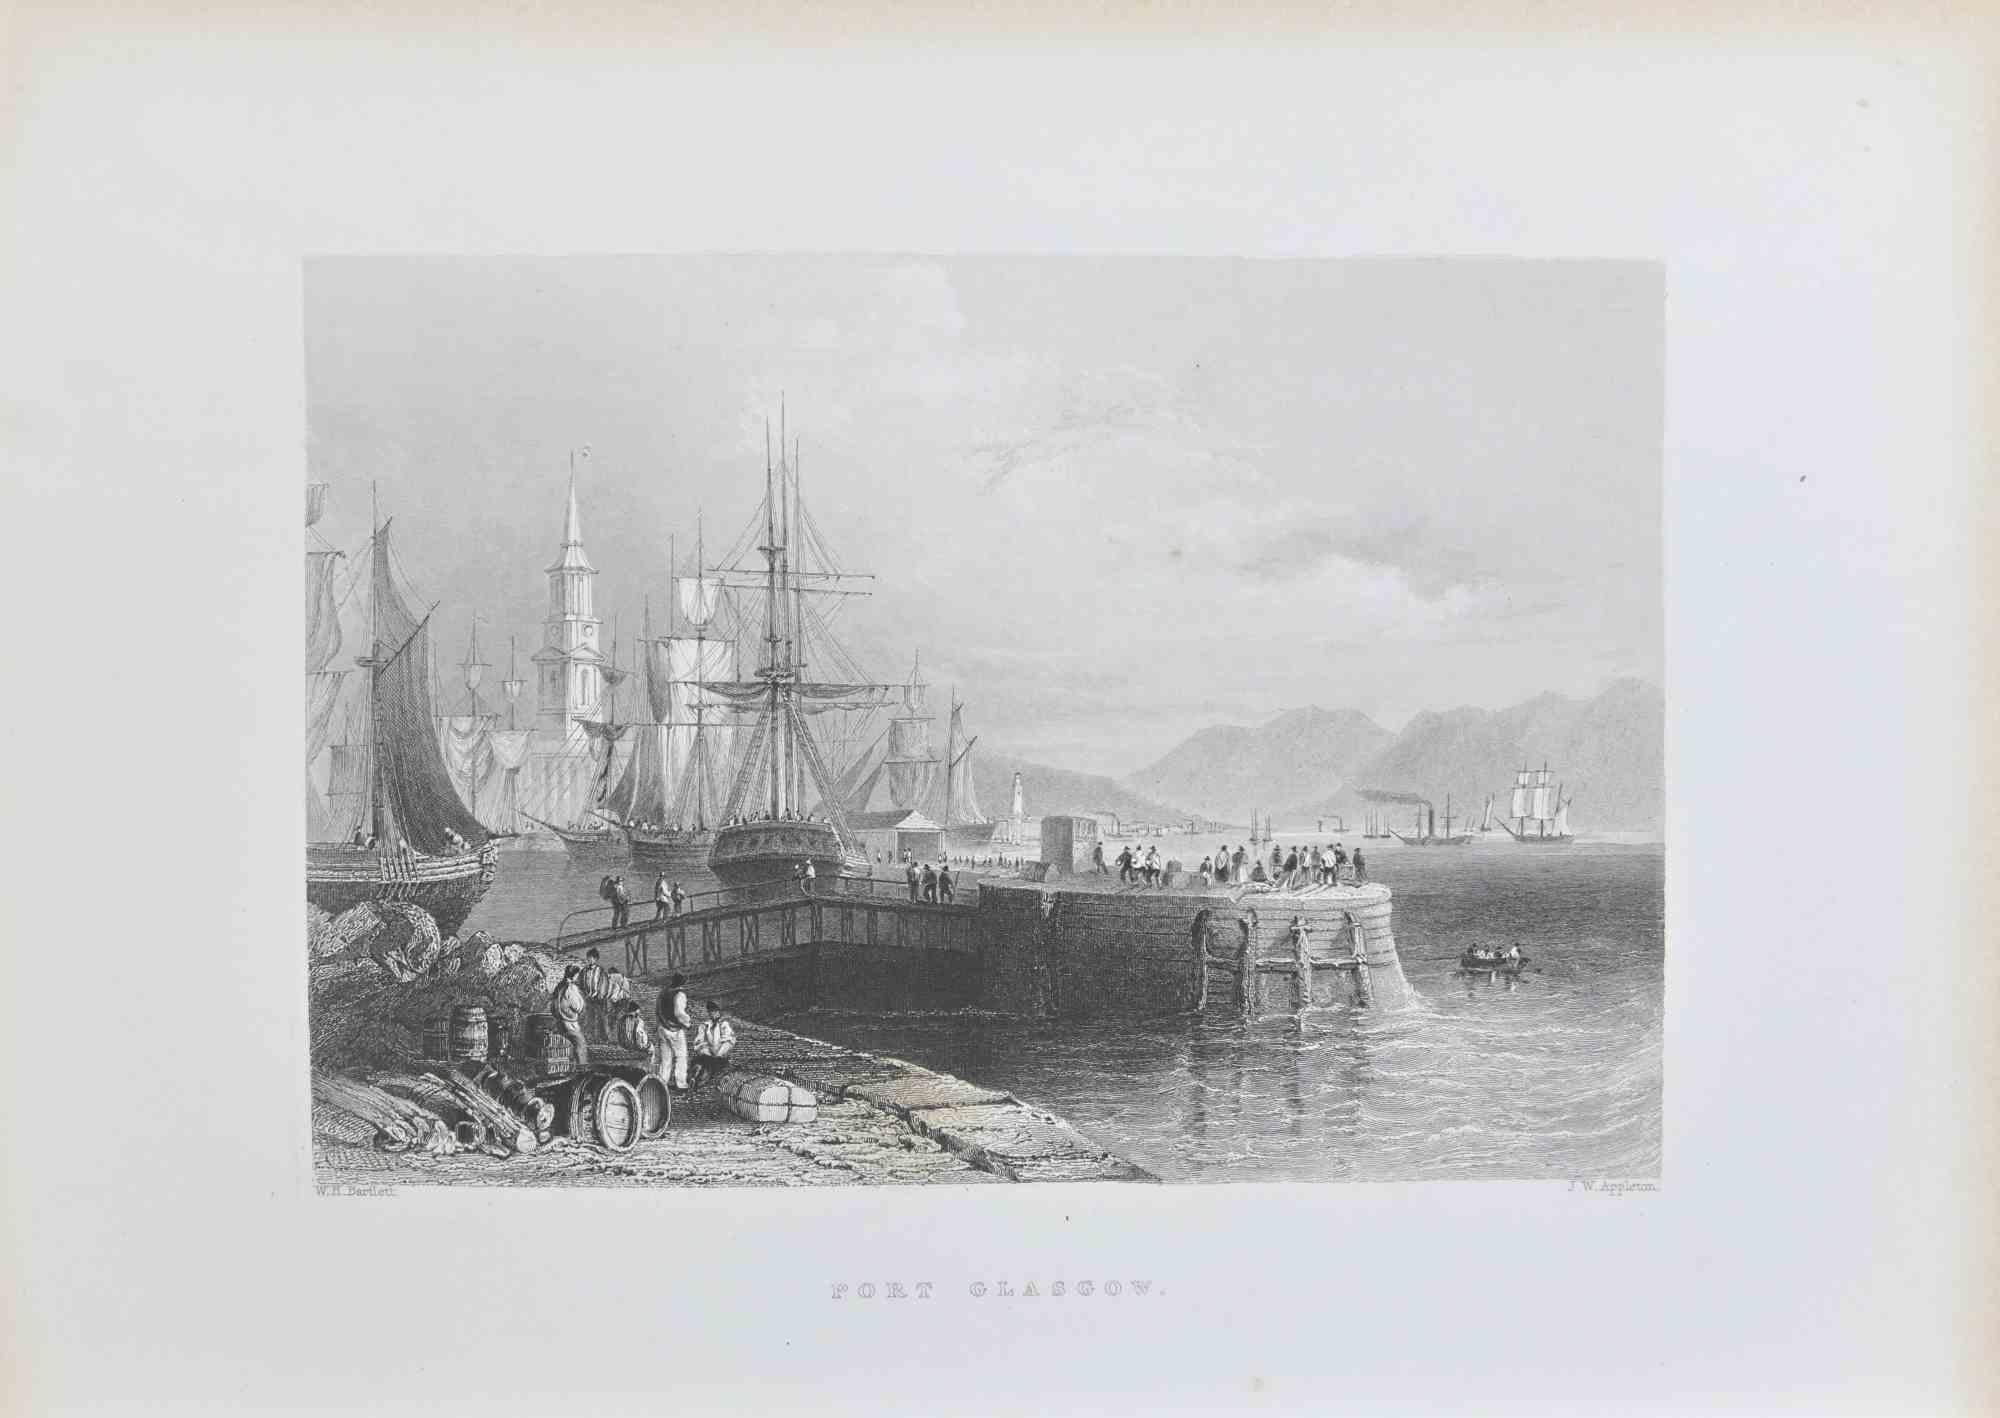 Port Glasgow is an etching realized in 1845 by W. H. Bartlett.

Signed on the plate. 

Titled on the lower center, from the series of "Ports of Great Britain". 

Good conditions with slight foxing.

The artwork is beautifully realized in a